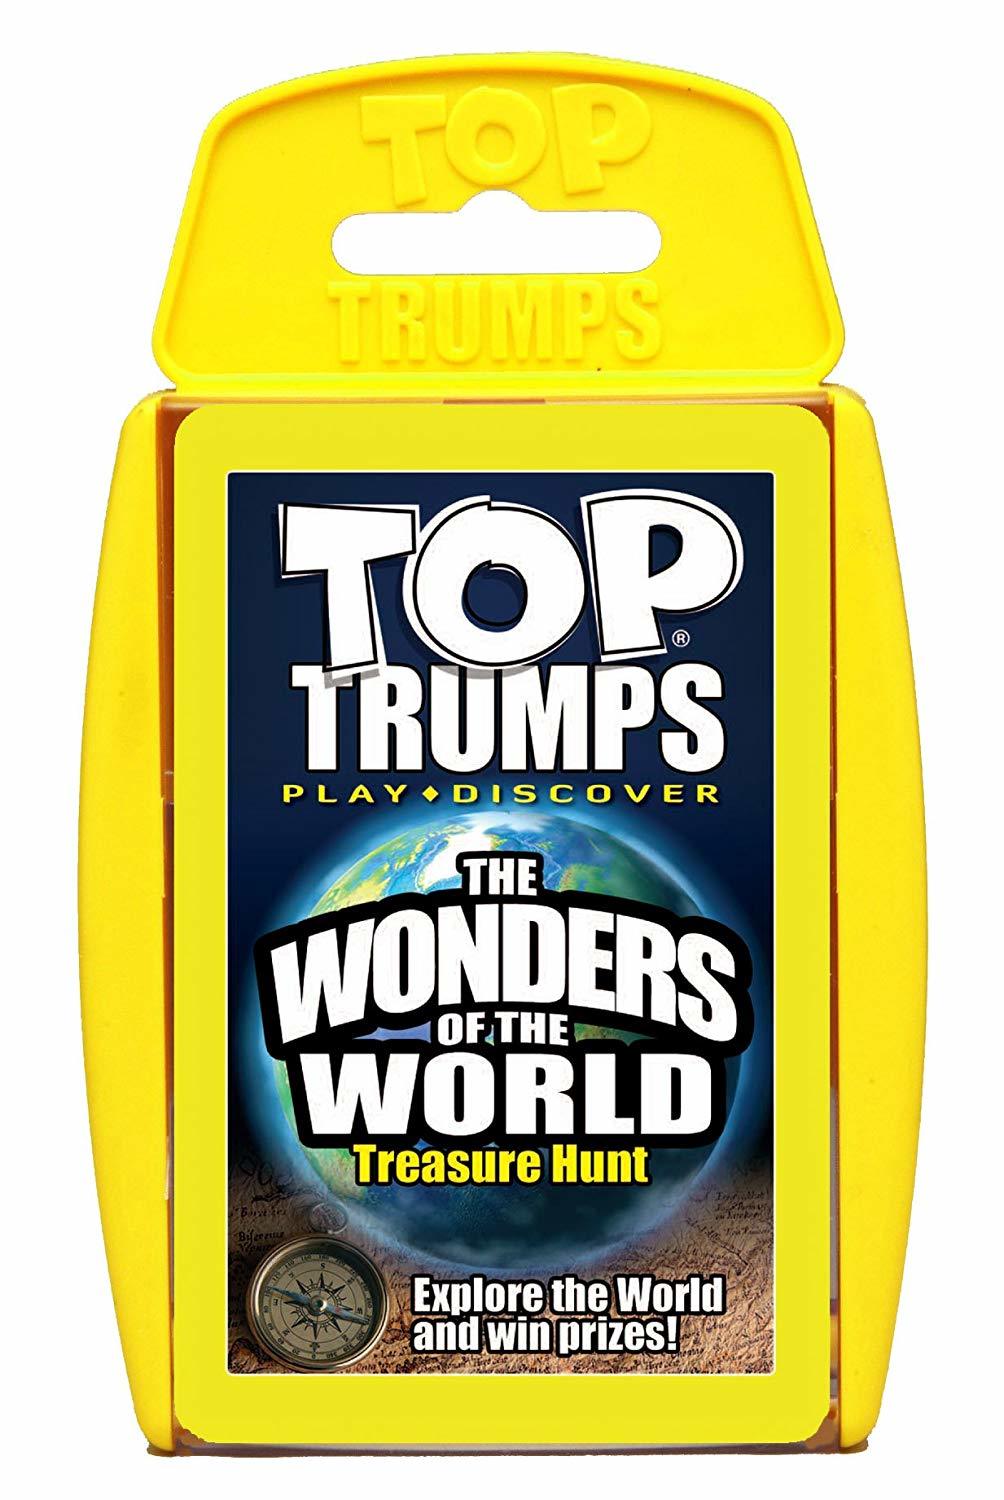 Top Trumps Wonders of the World